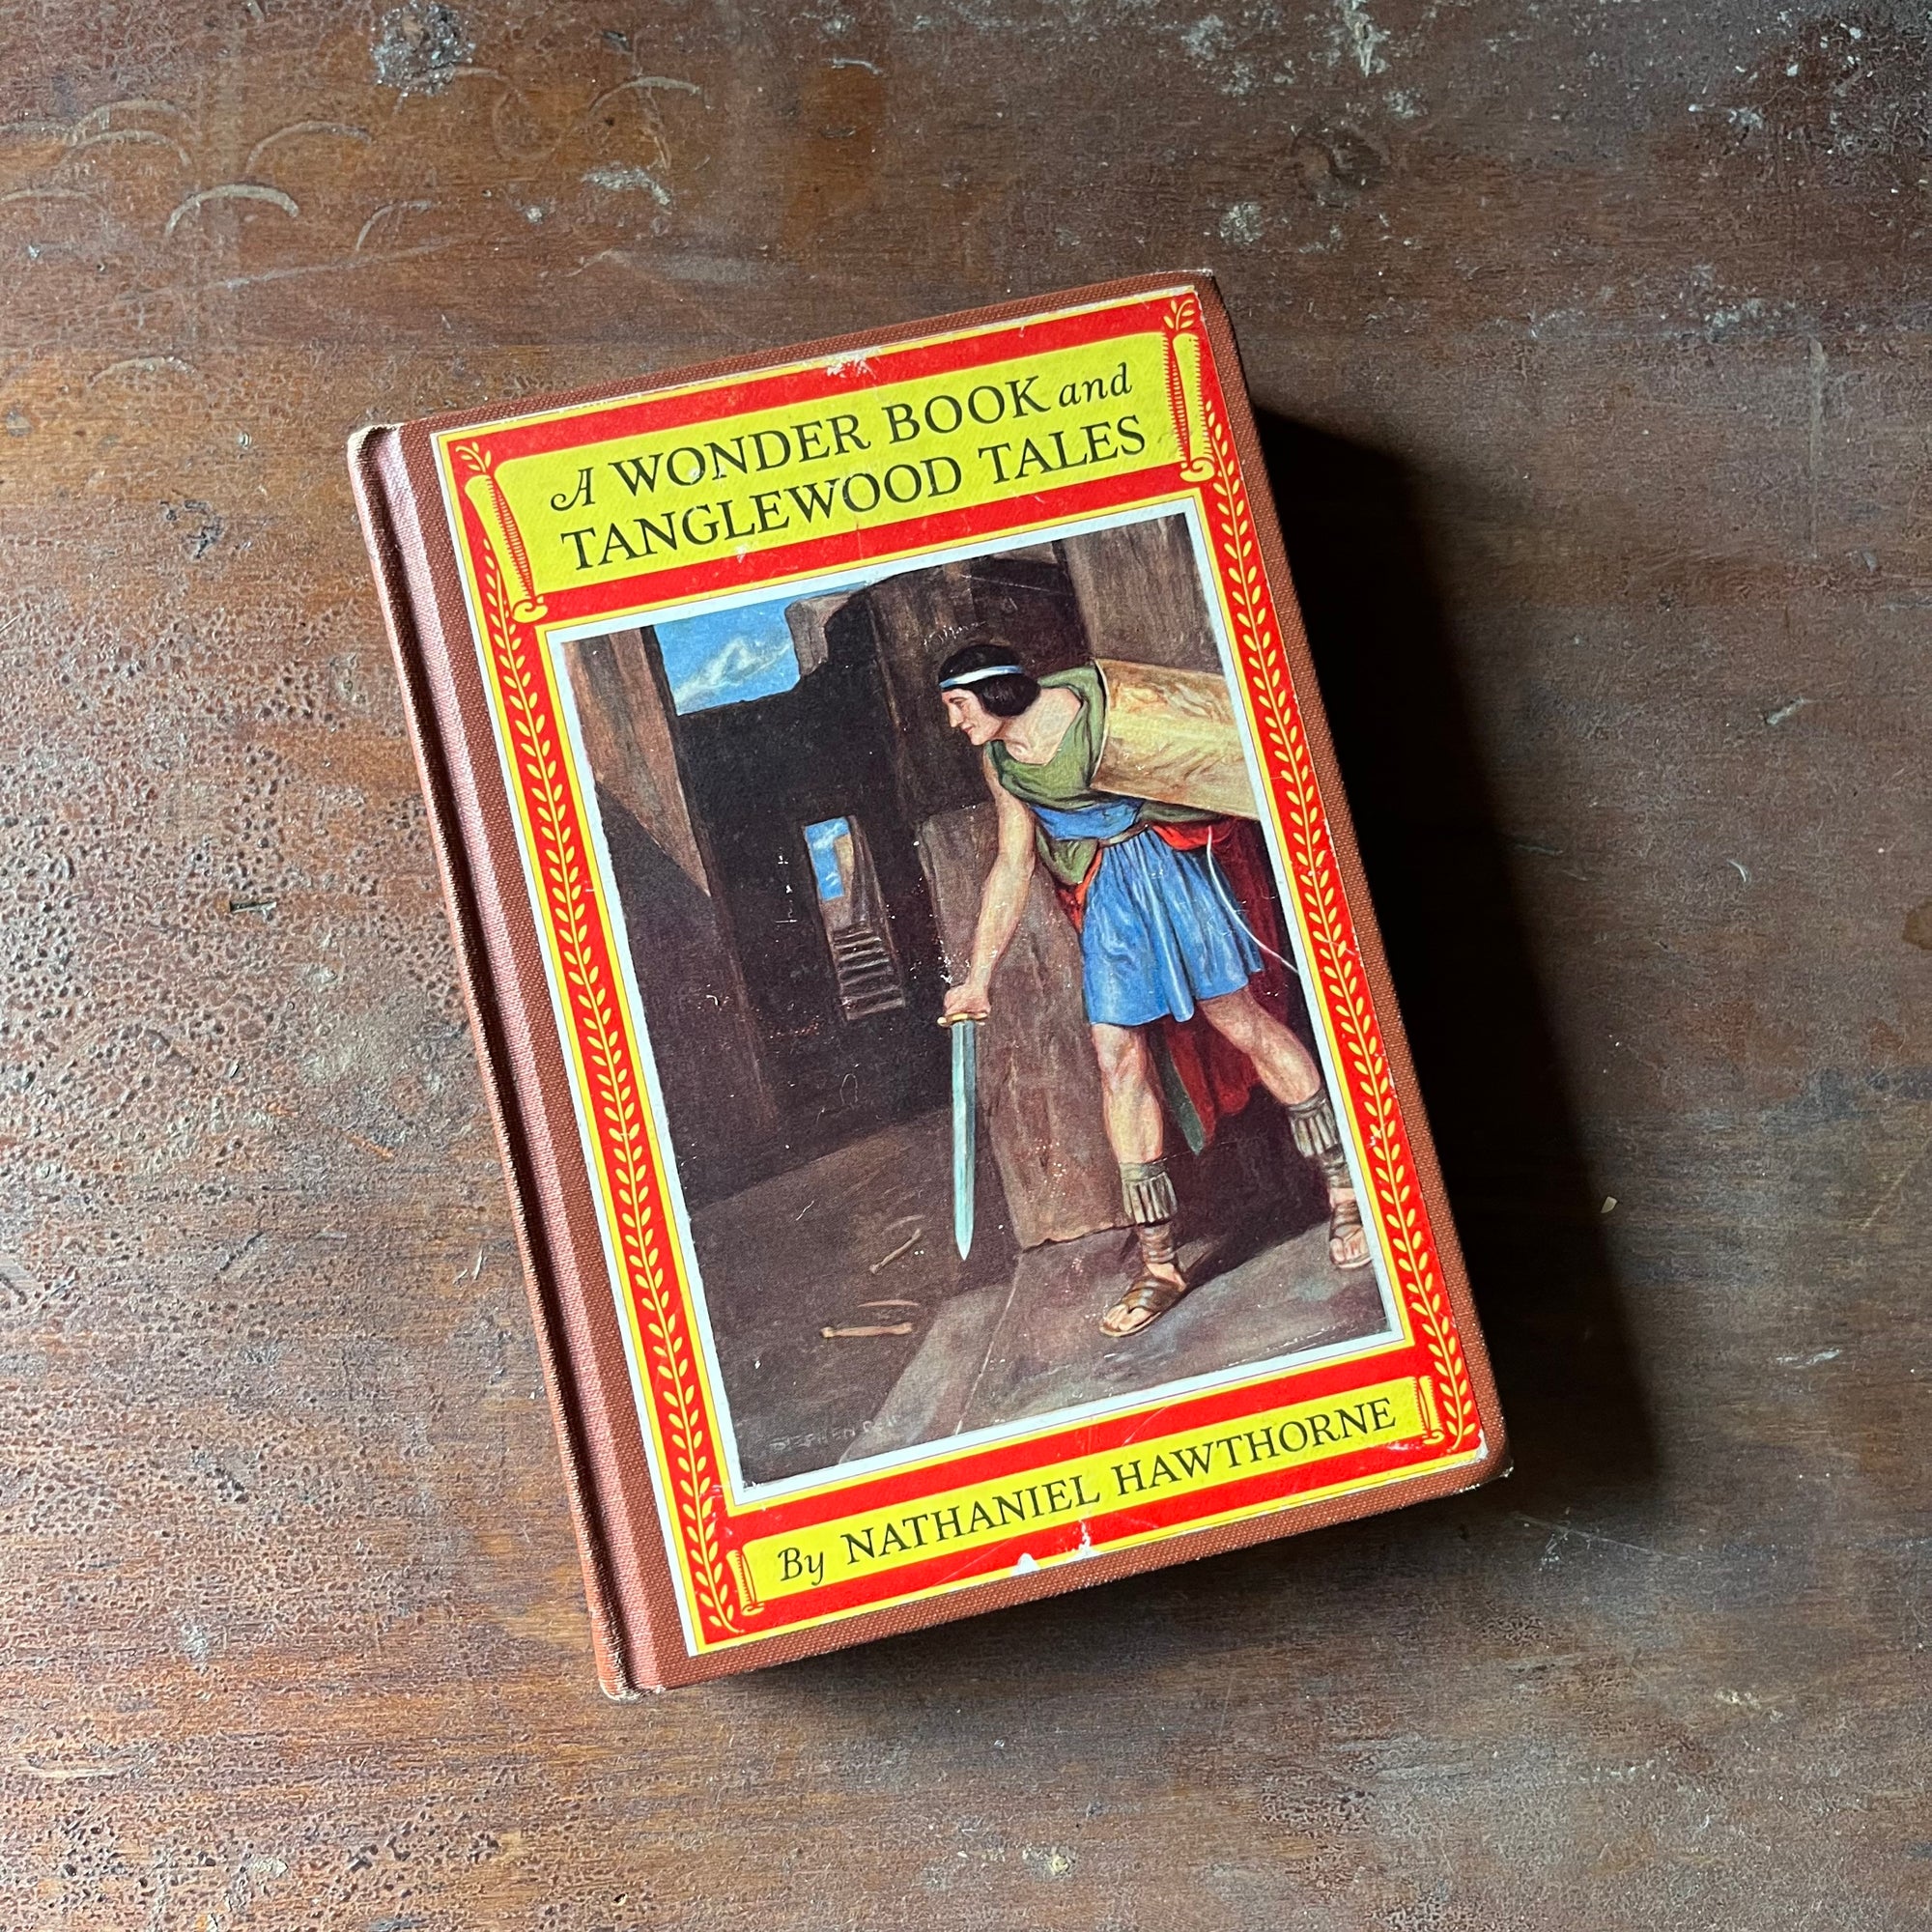 The Newbery Classics - A Wonder Book and Tanglewood Tales by Nathaniel Hawthorne - view of the front cover